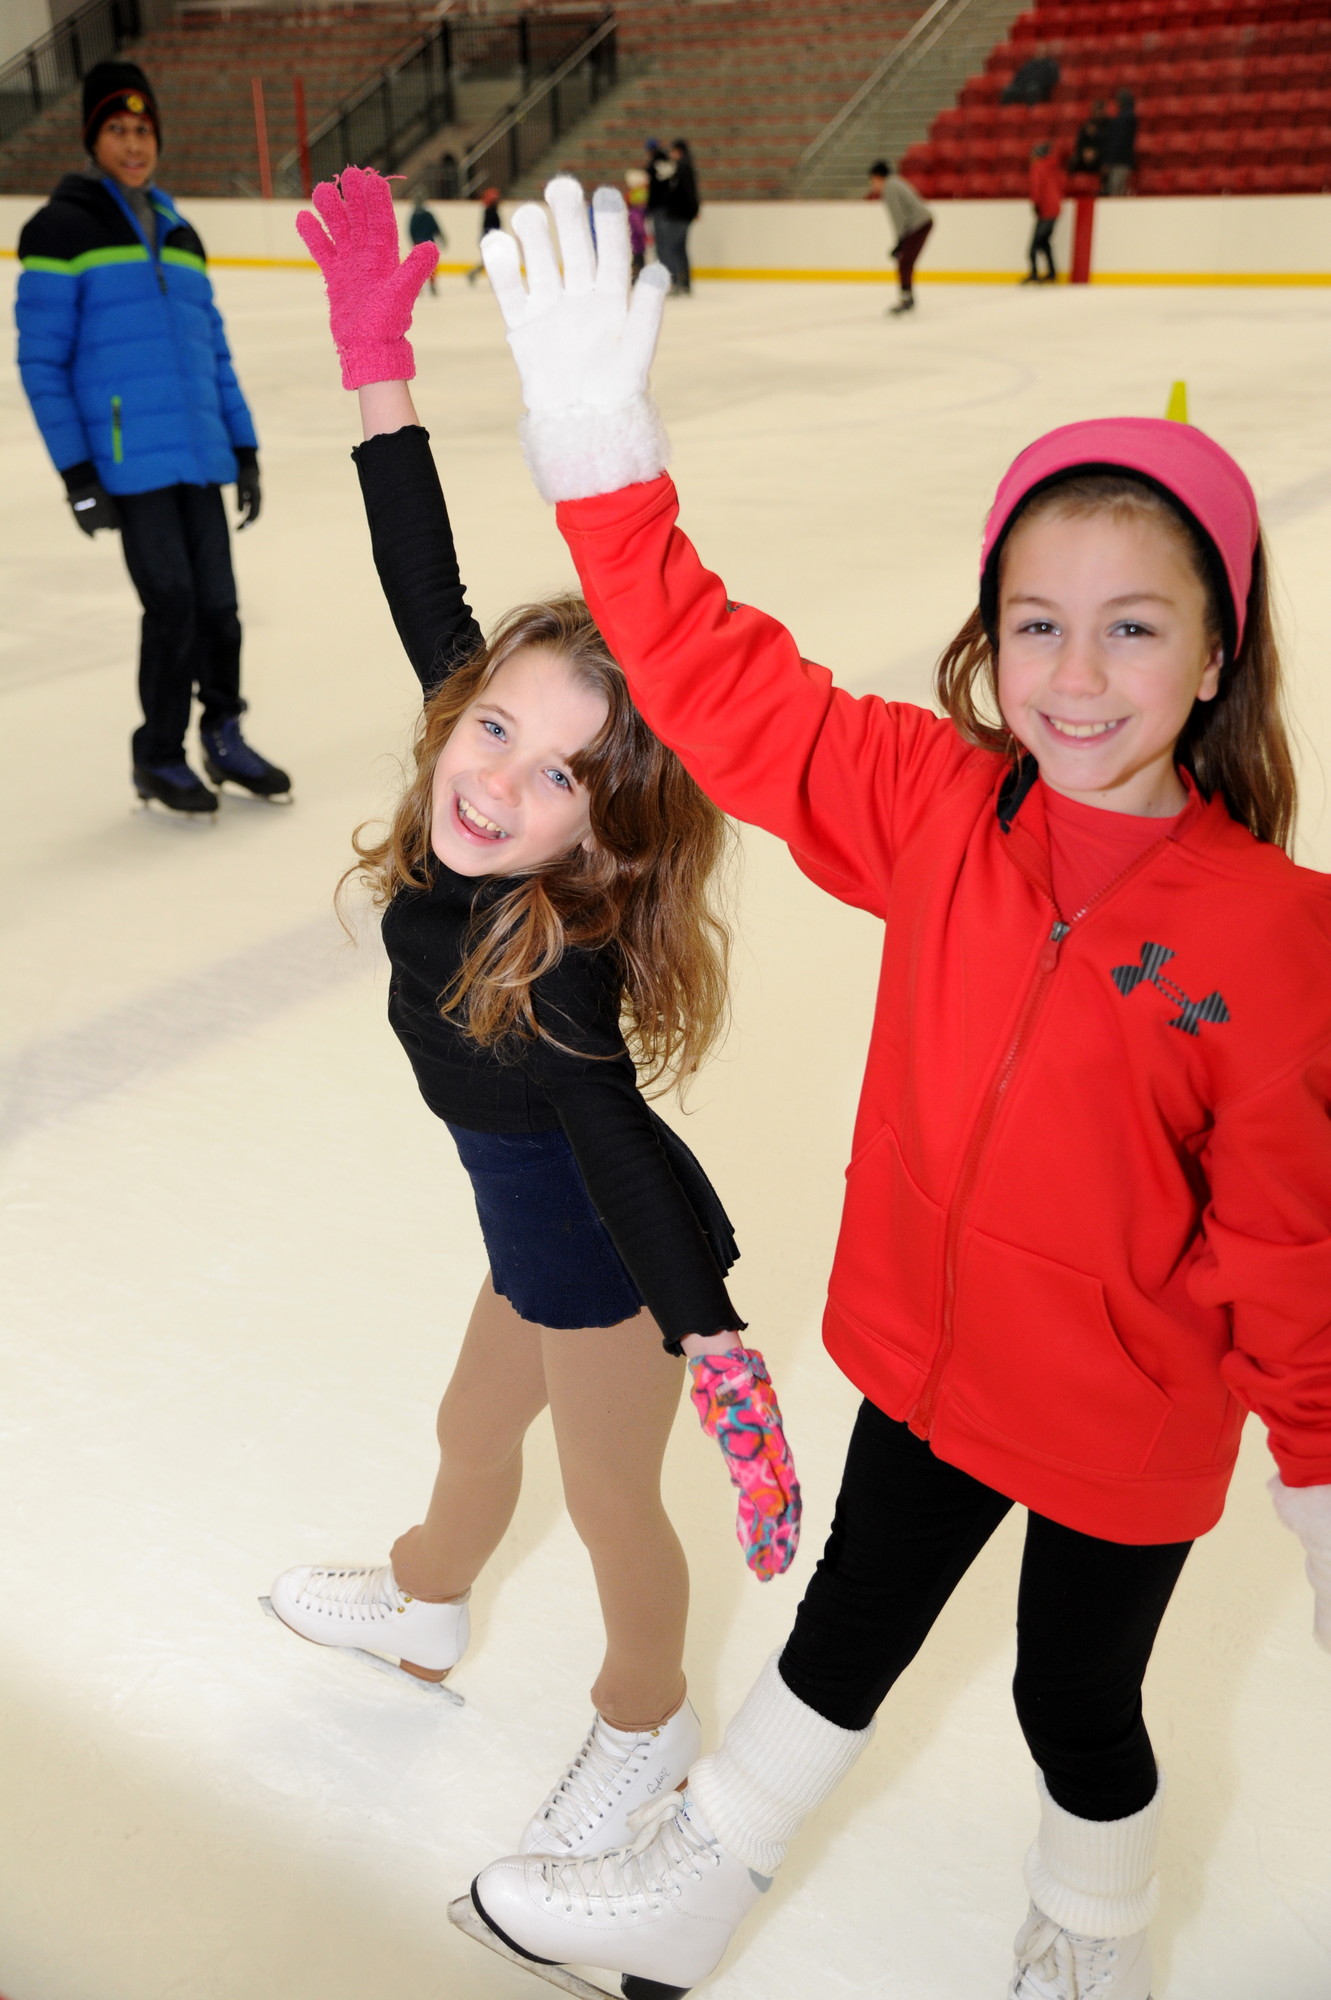 Kimberly Ovatia, 8, of East Meadow, left, and Samantha Yalvac, 10, skated by to say hello.